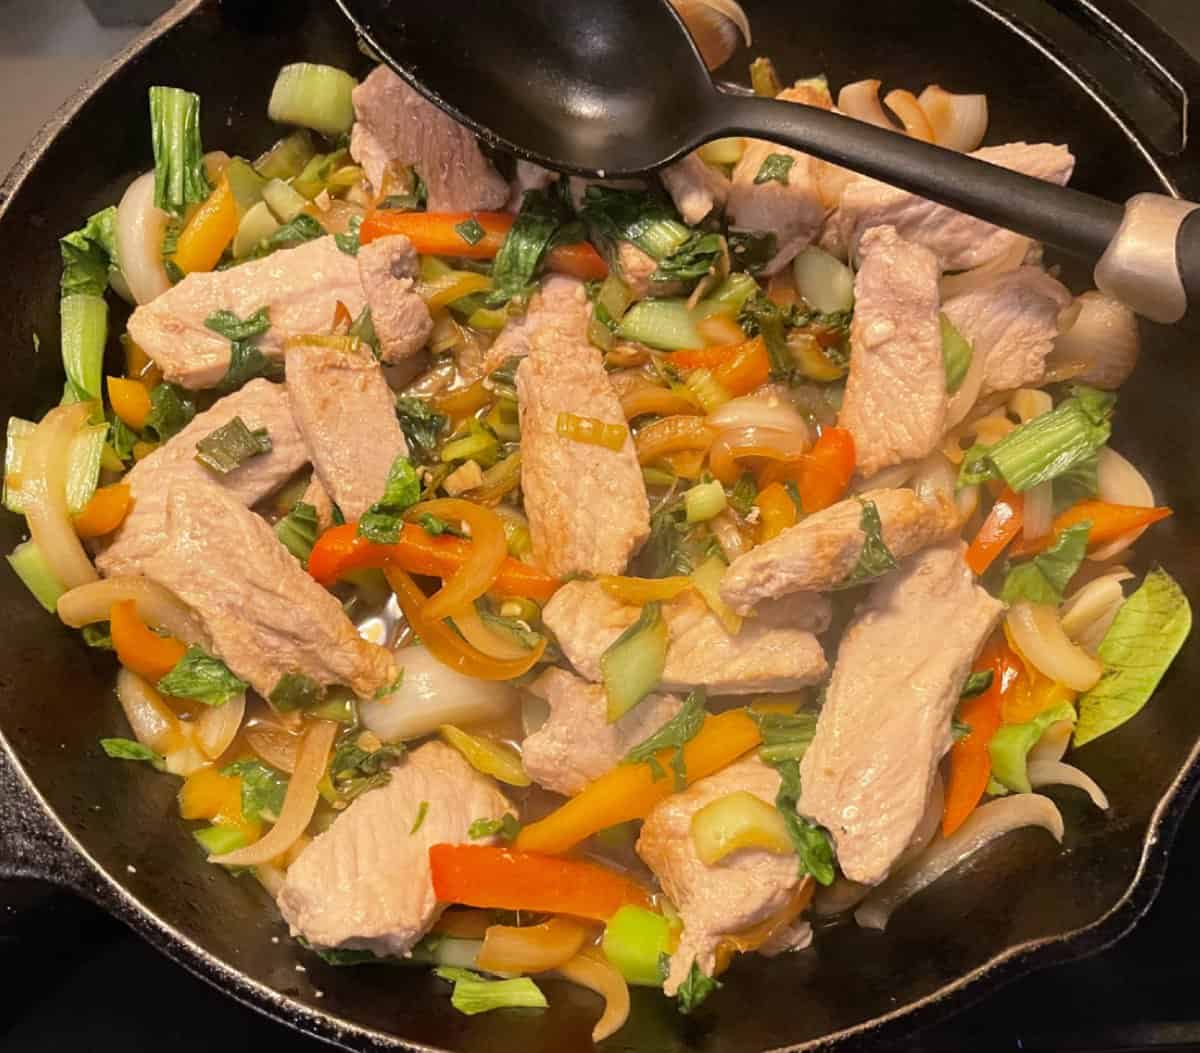 Cooked pork, sliced white onion, red pepper, orange pepper, and bok choy prepared in a black frying pan.